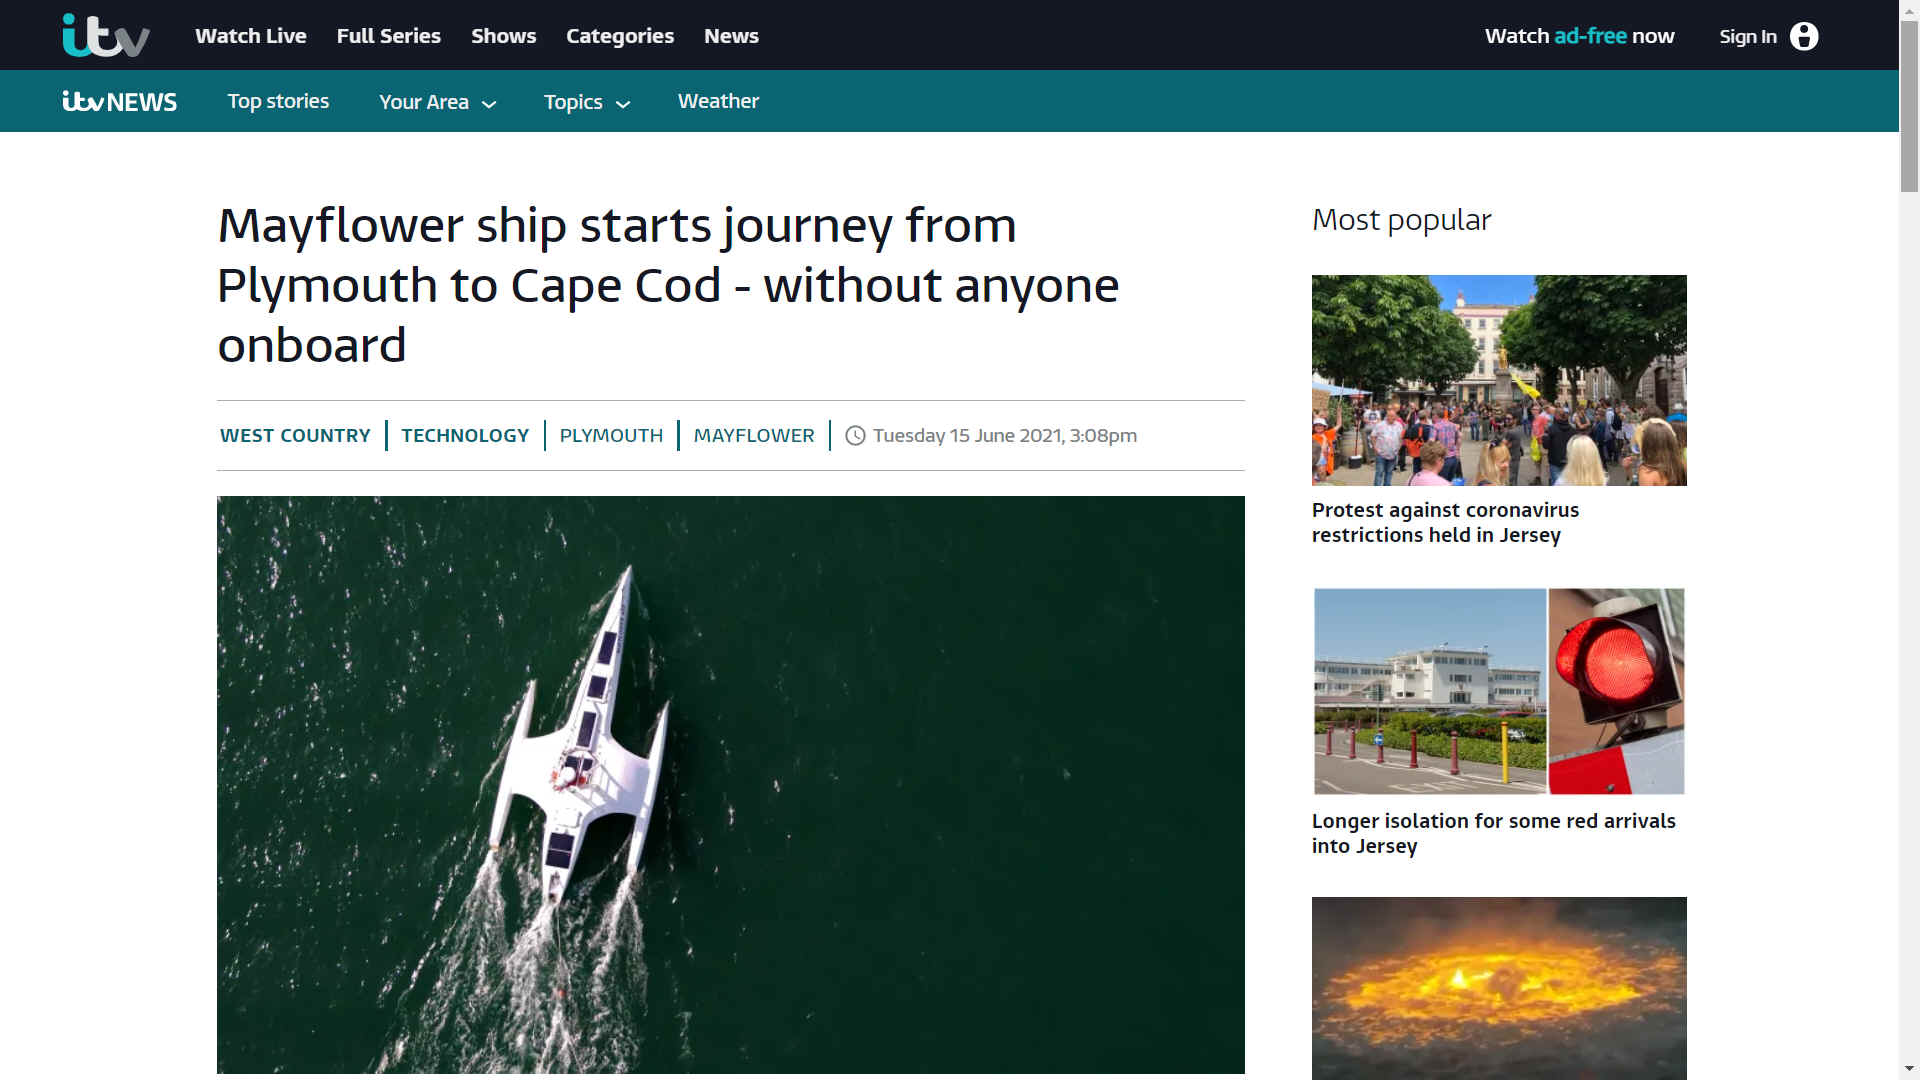 ITN News 15th July 2021 Mayflower ship starts journey from Plymouth to Cape Cod without anyone onboard